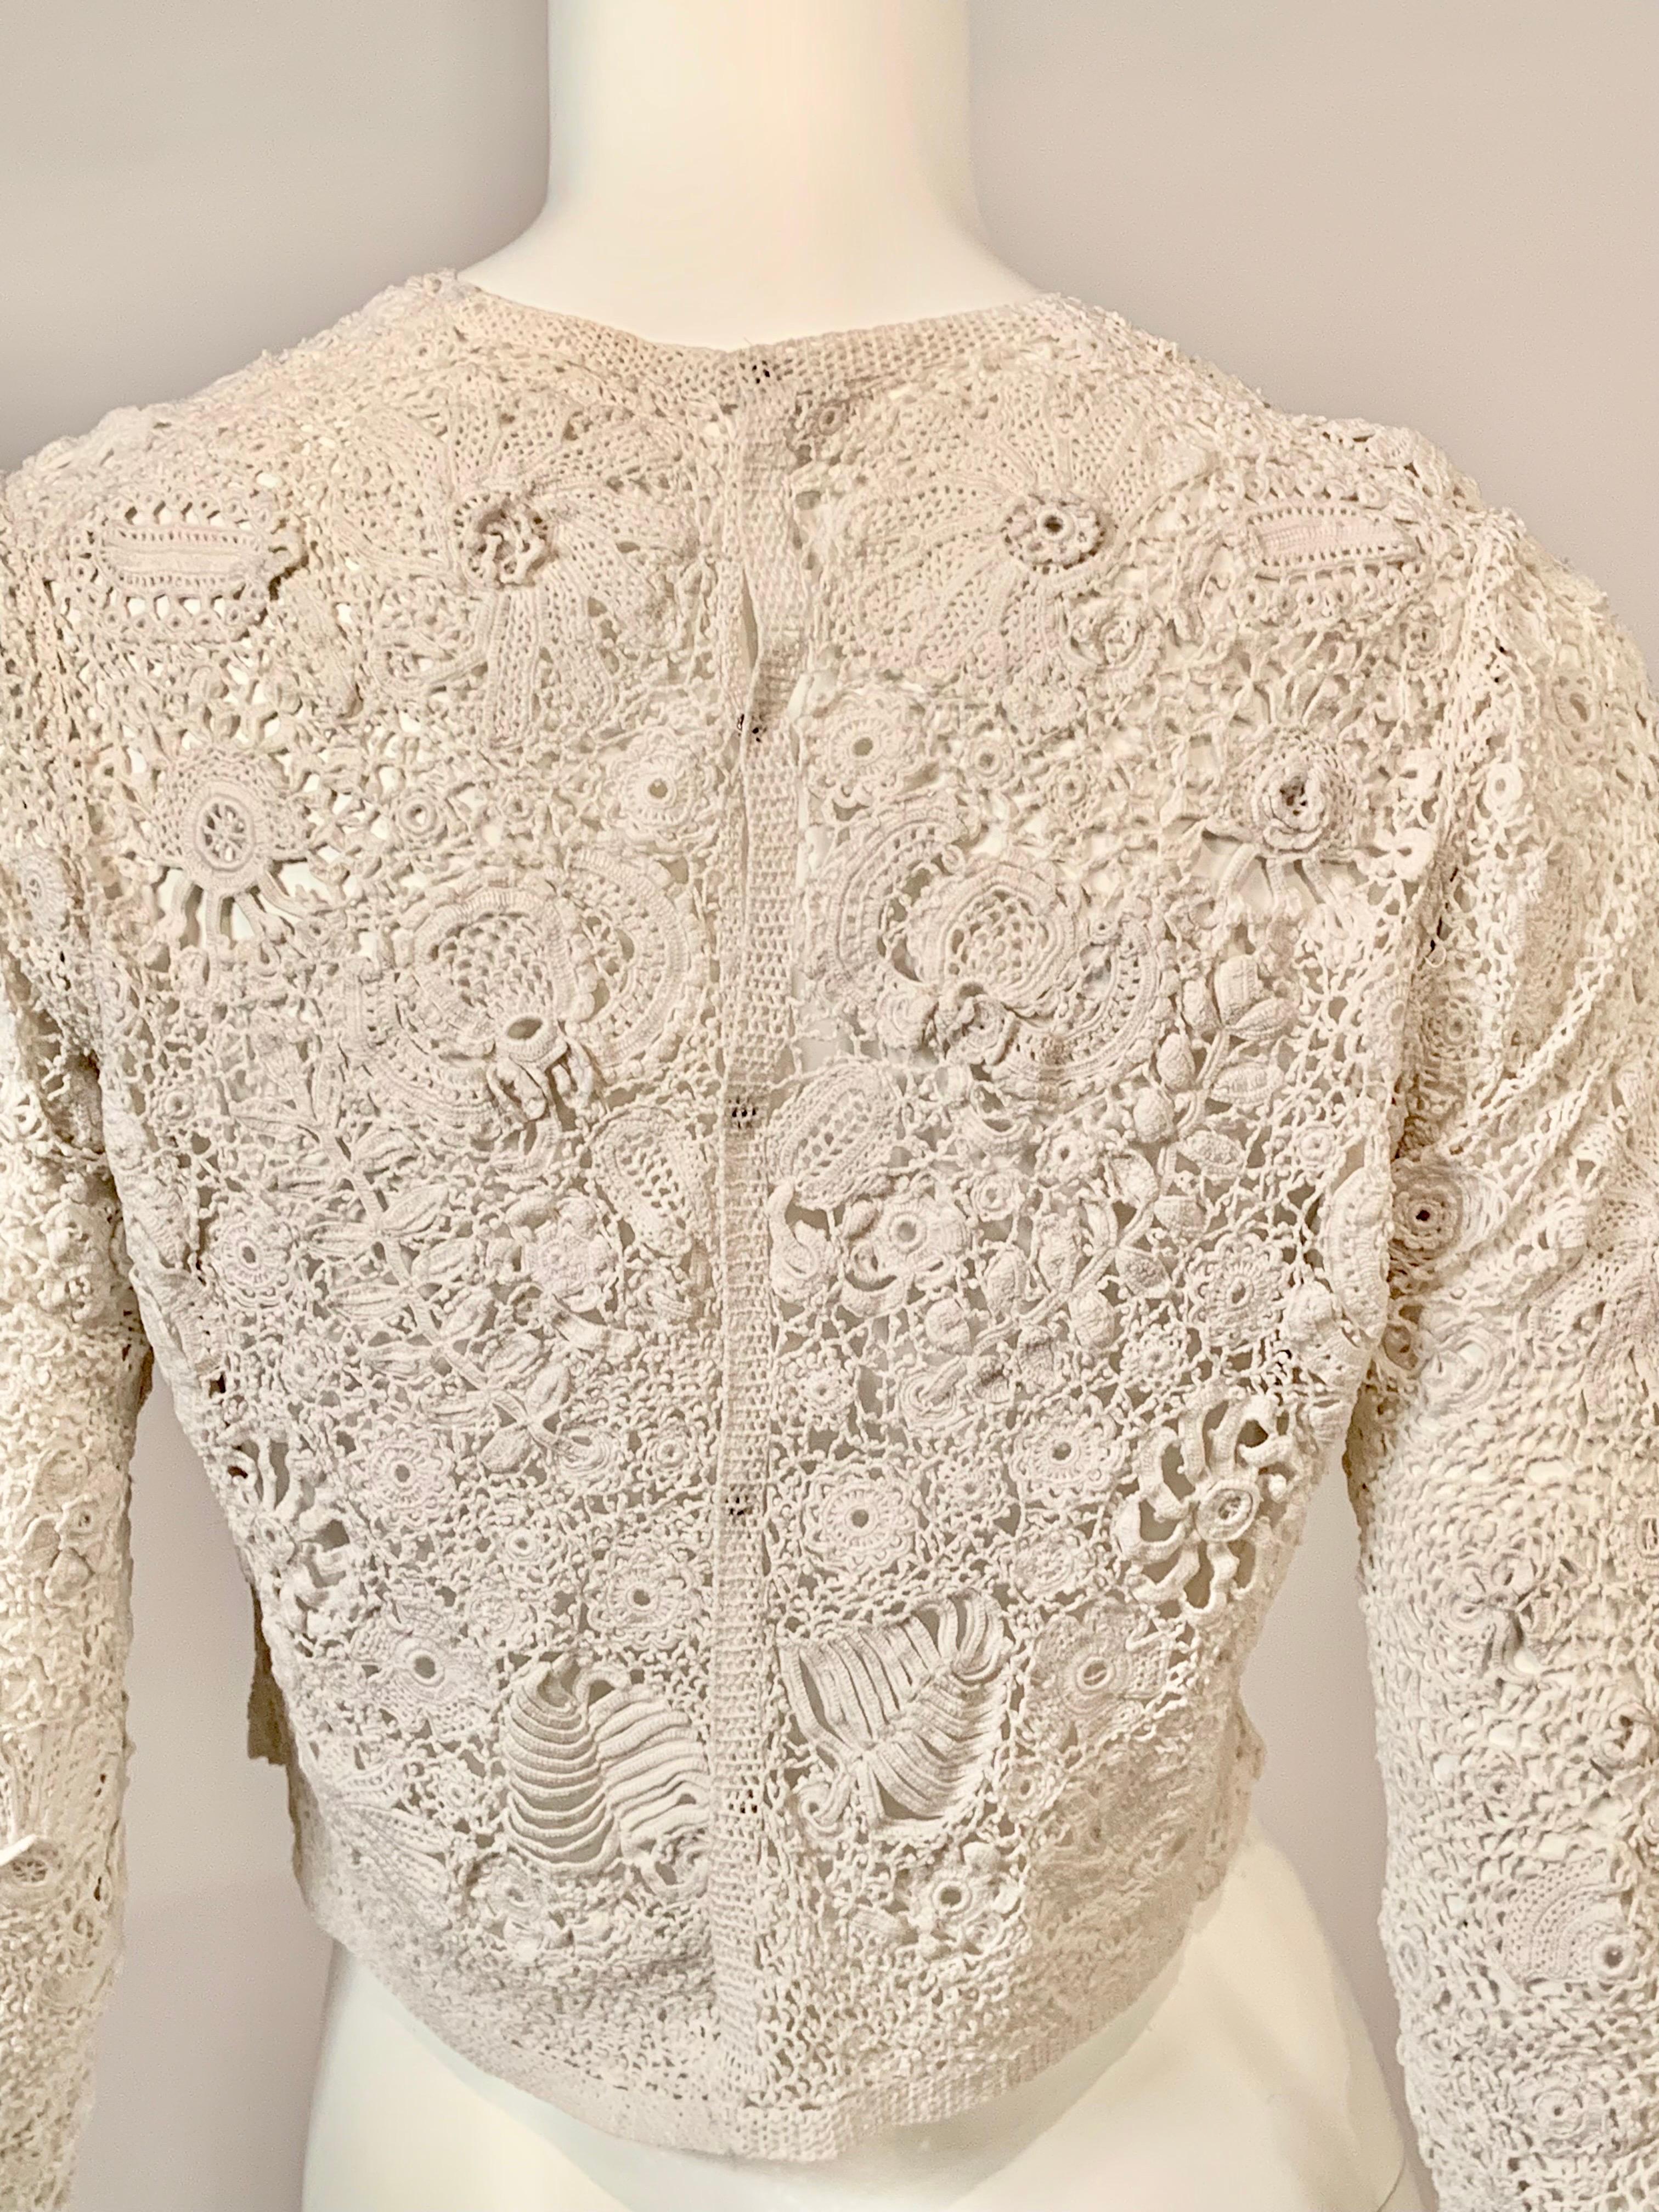 Antique Hand Crocheted Irish Lace Blouse with Flowers and Shamrocks 8